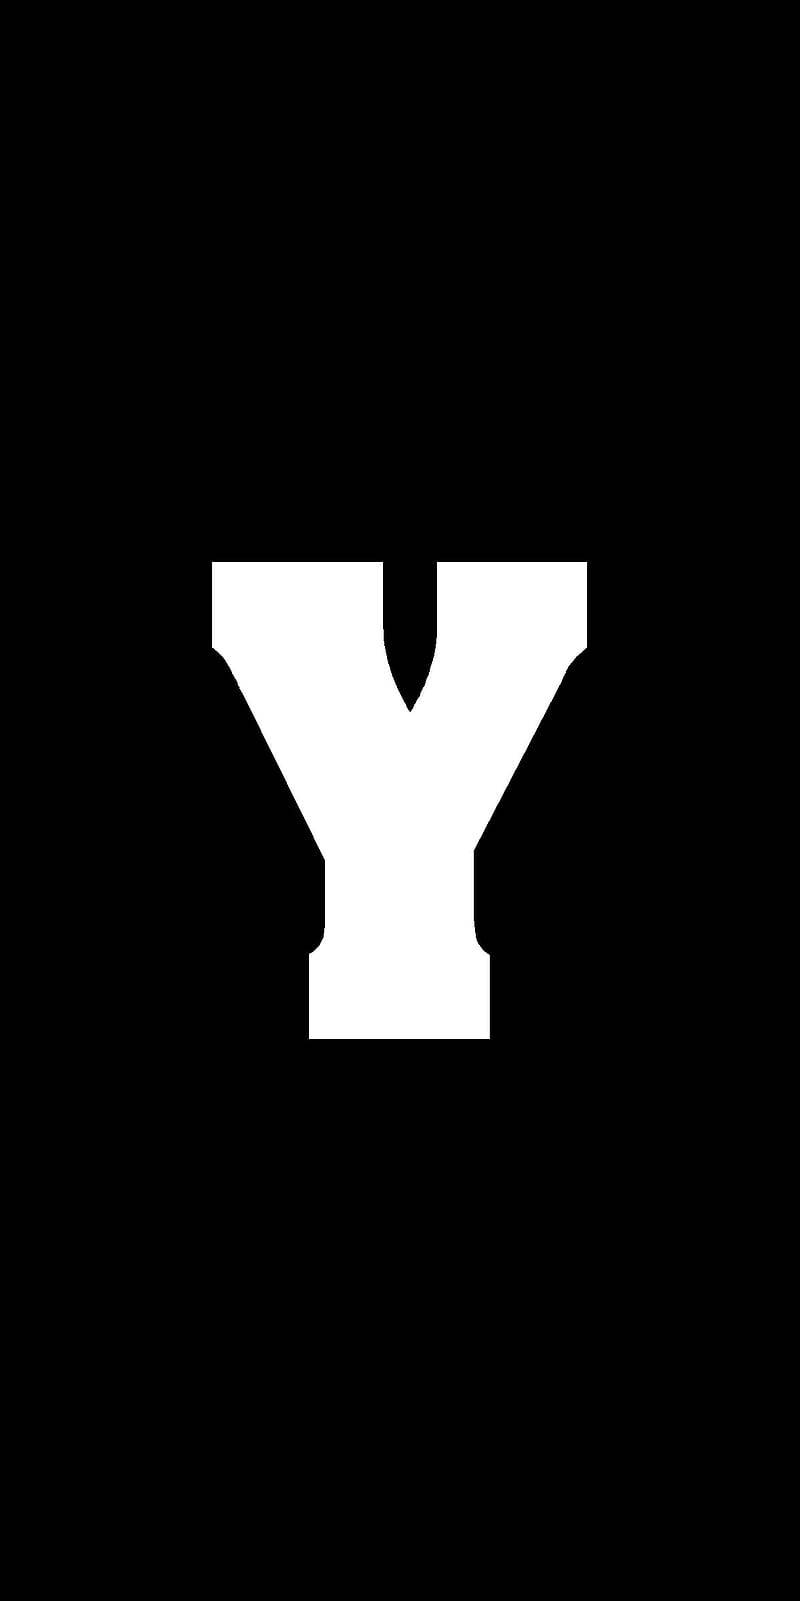 Captivating Letter Y in White on Black Background Wallpaper